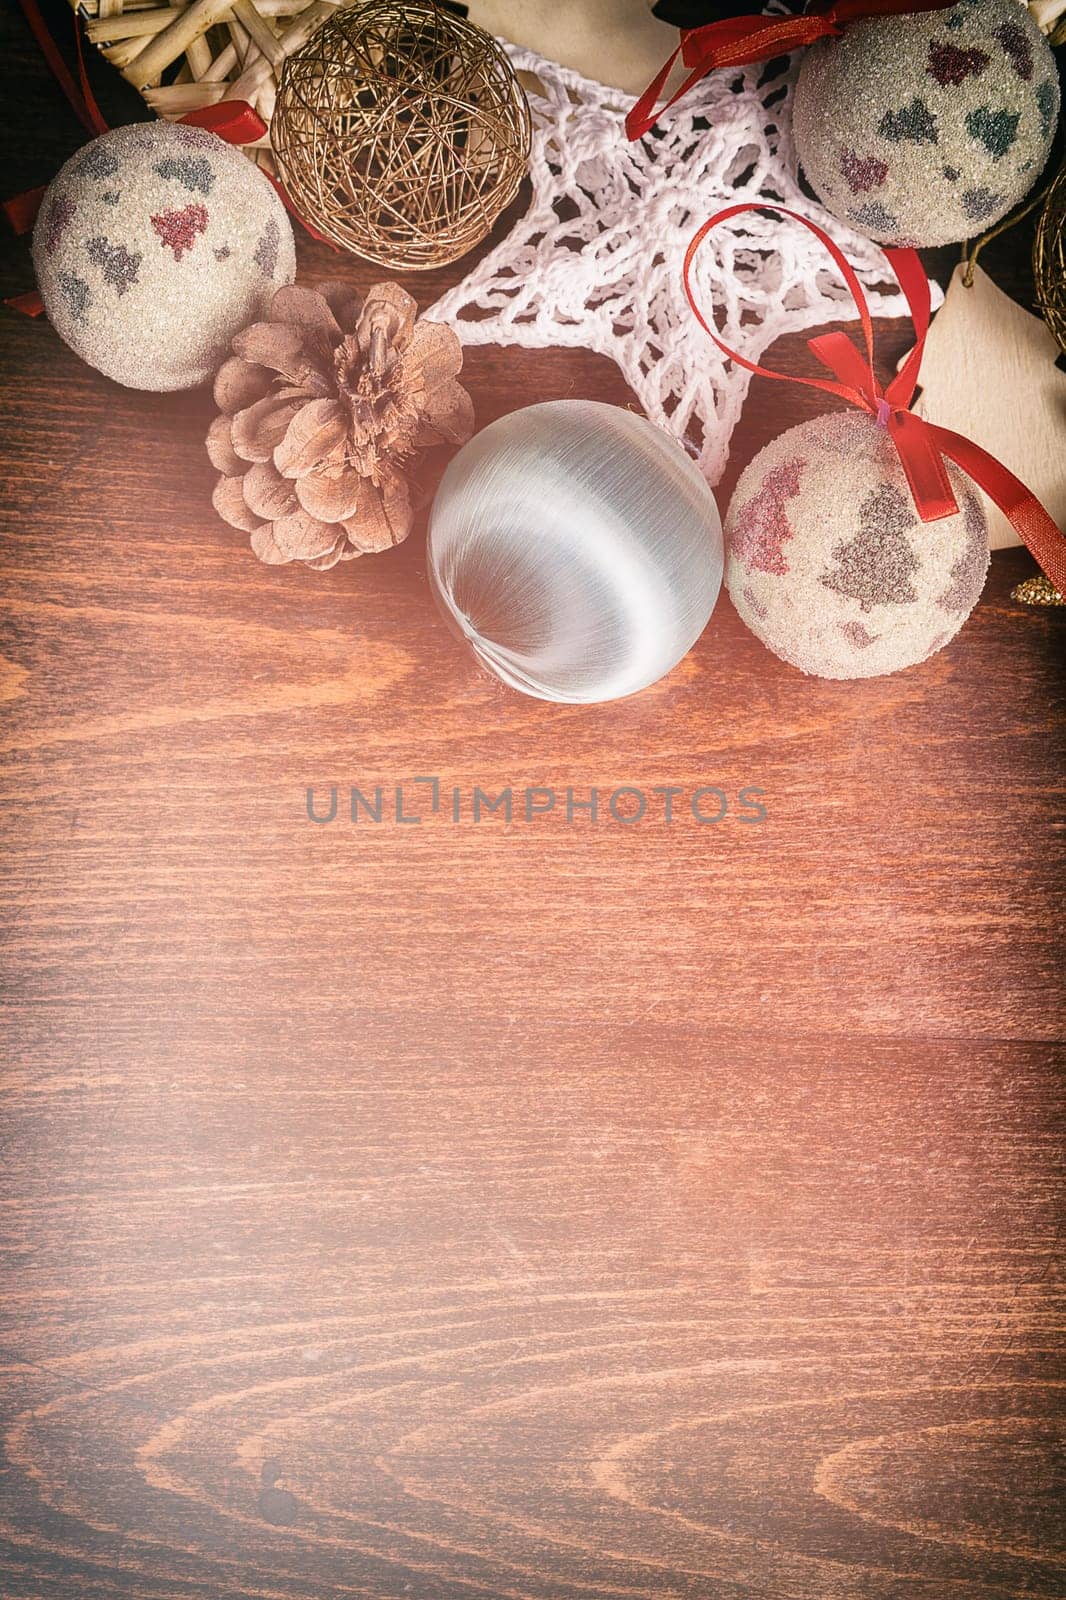 Christmas decorations on wooden background. Vintage toning. Winter decorations table